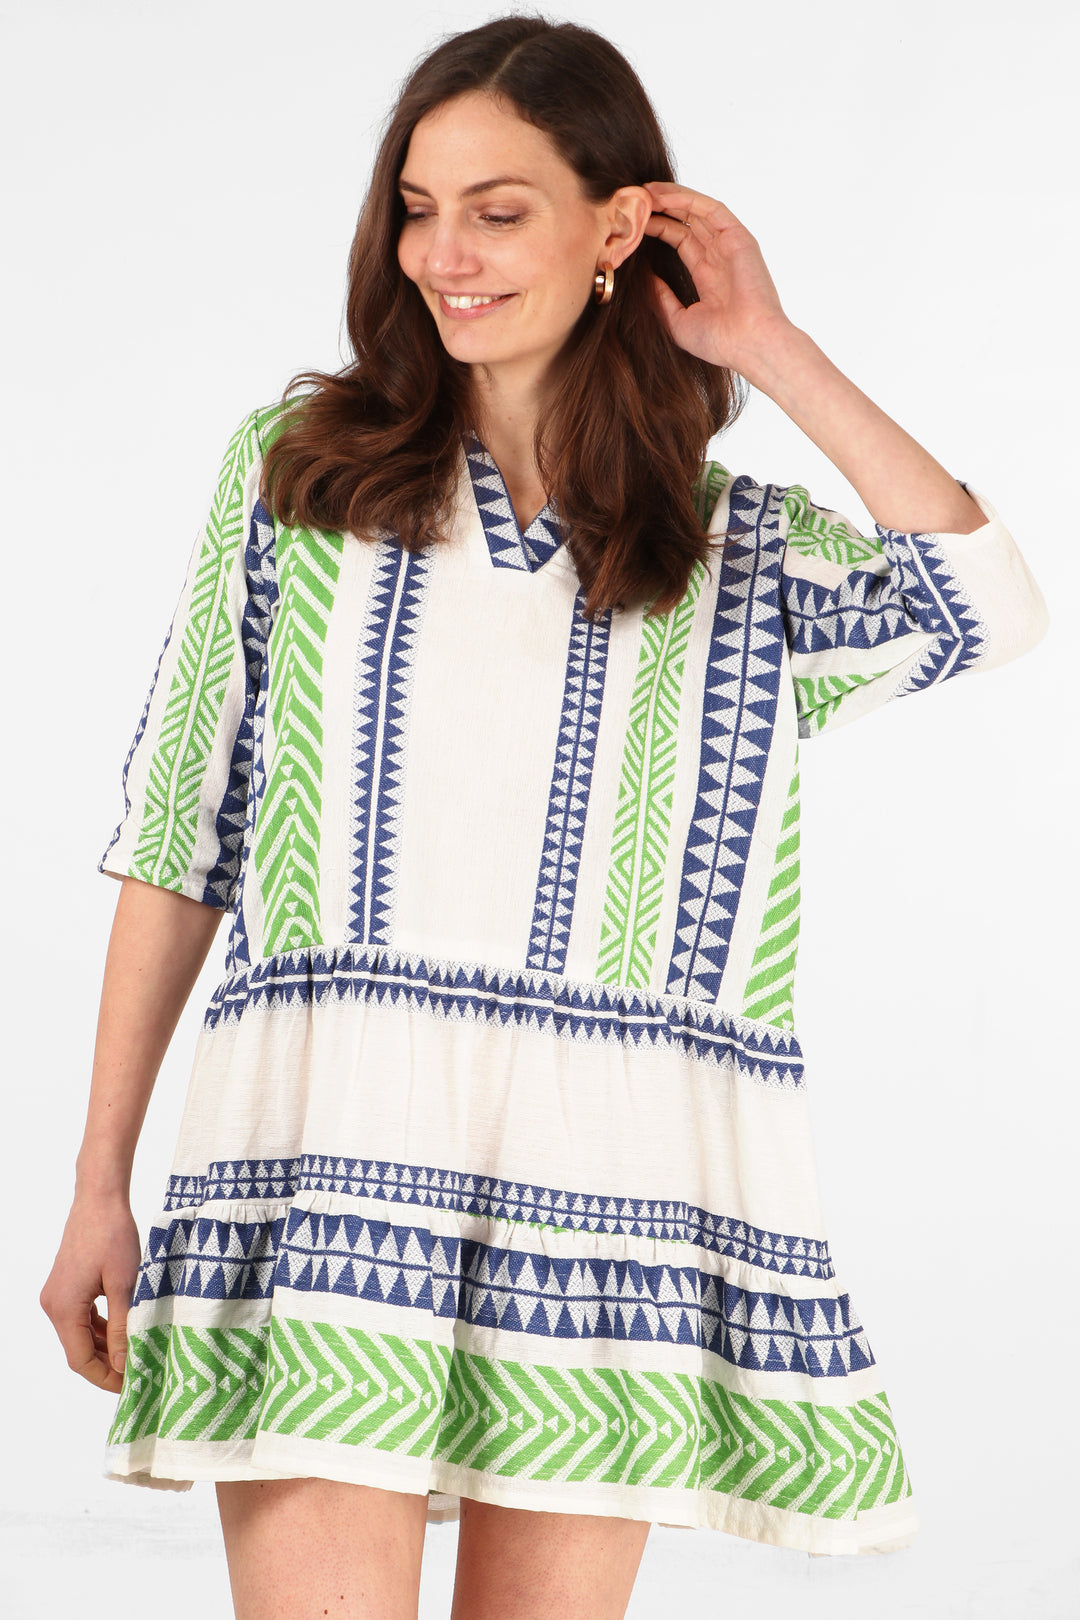 model wearing a green and blue aztec print mini dress with 3/4 sleeves